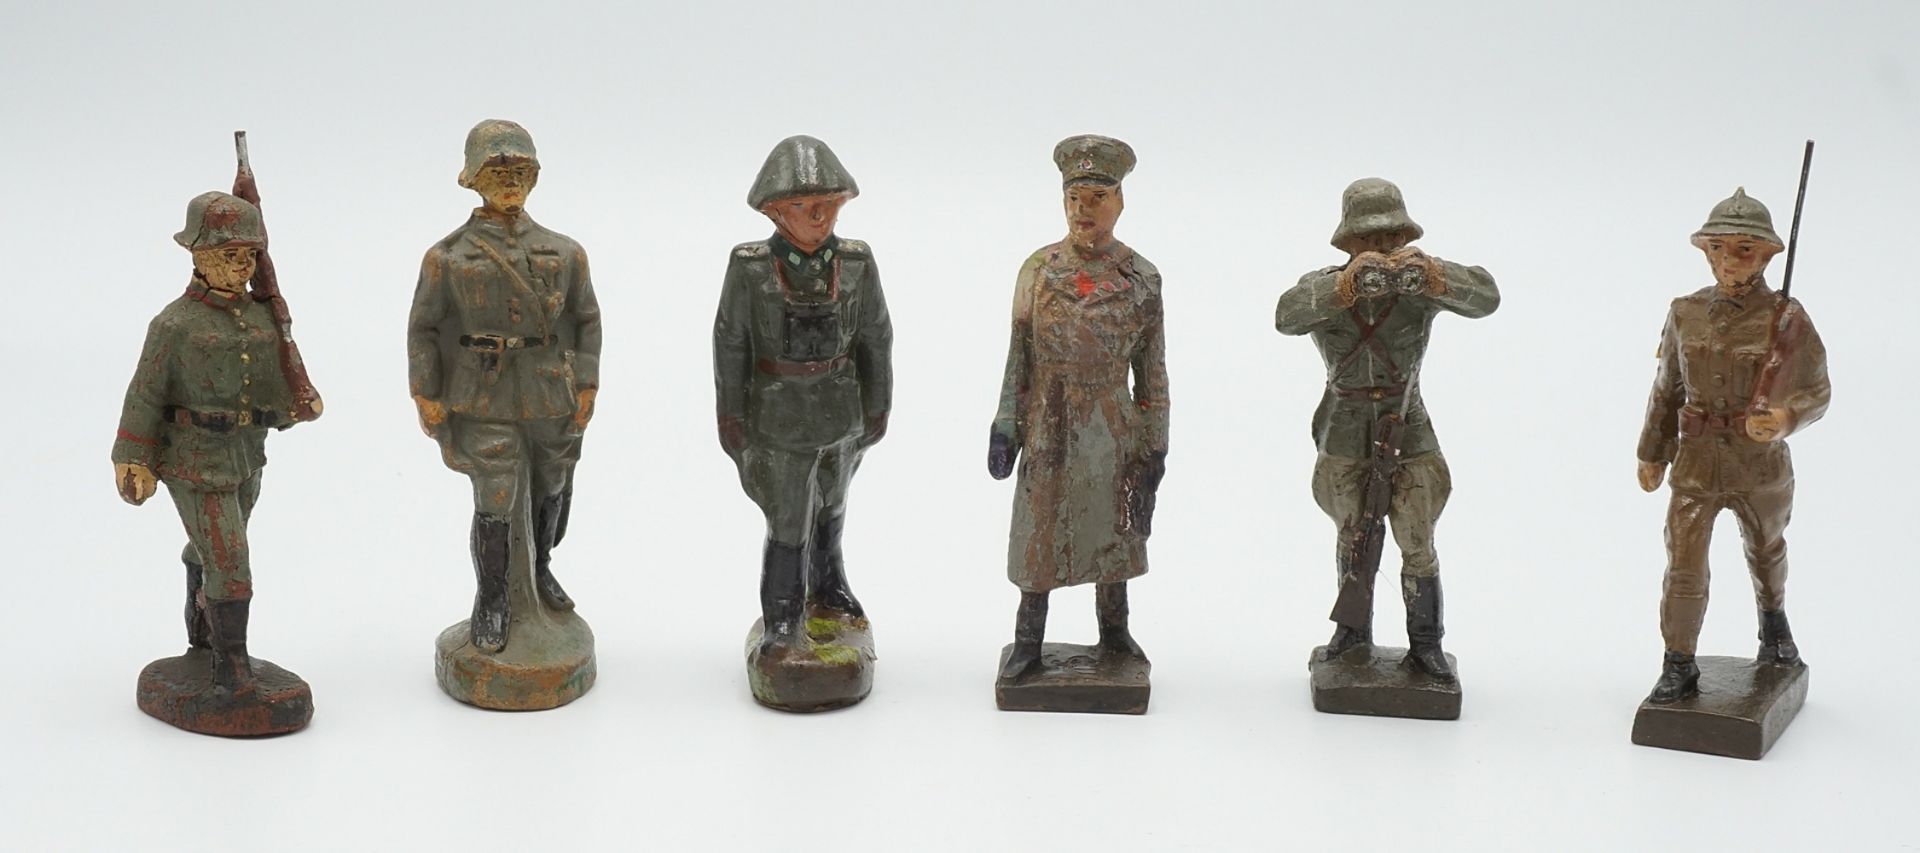 20 soldiers / mass figures - Image 4 of 5